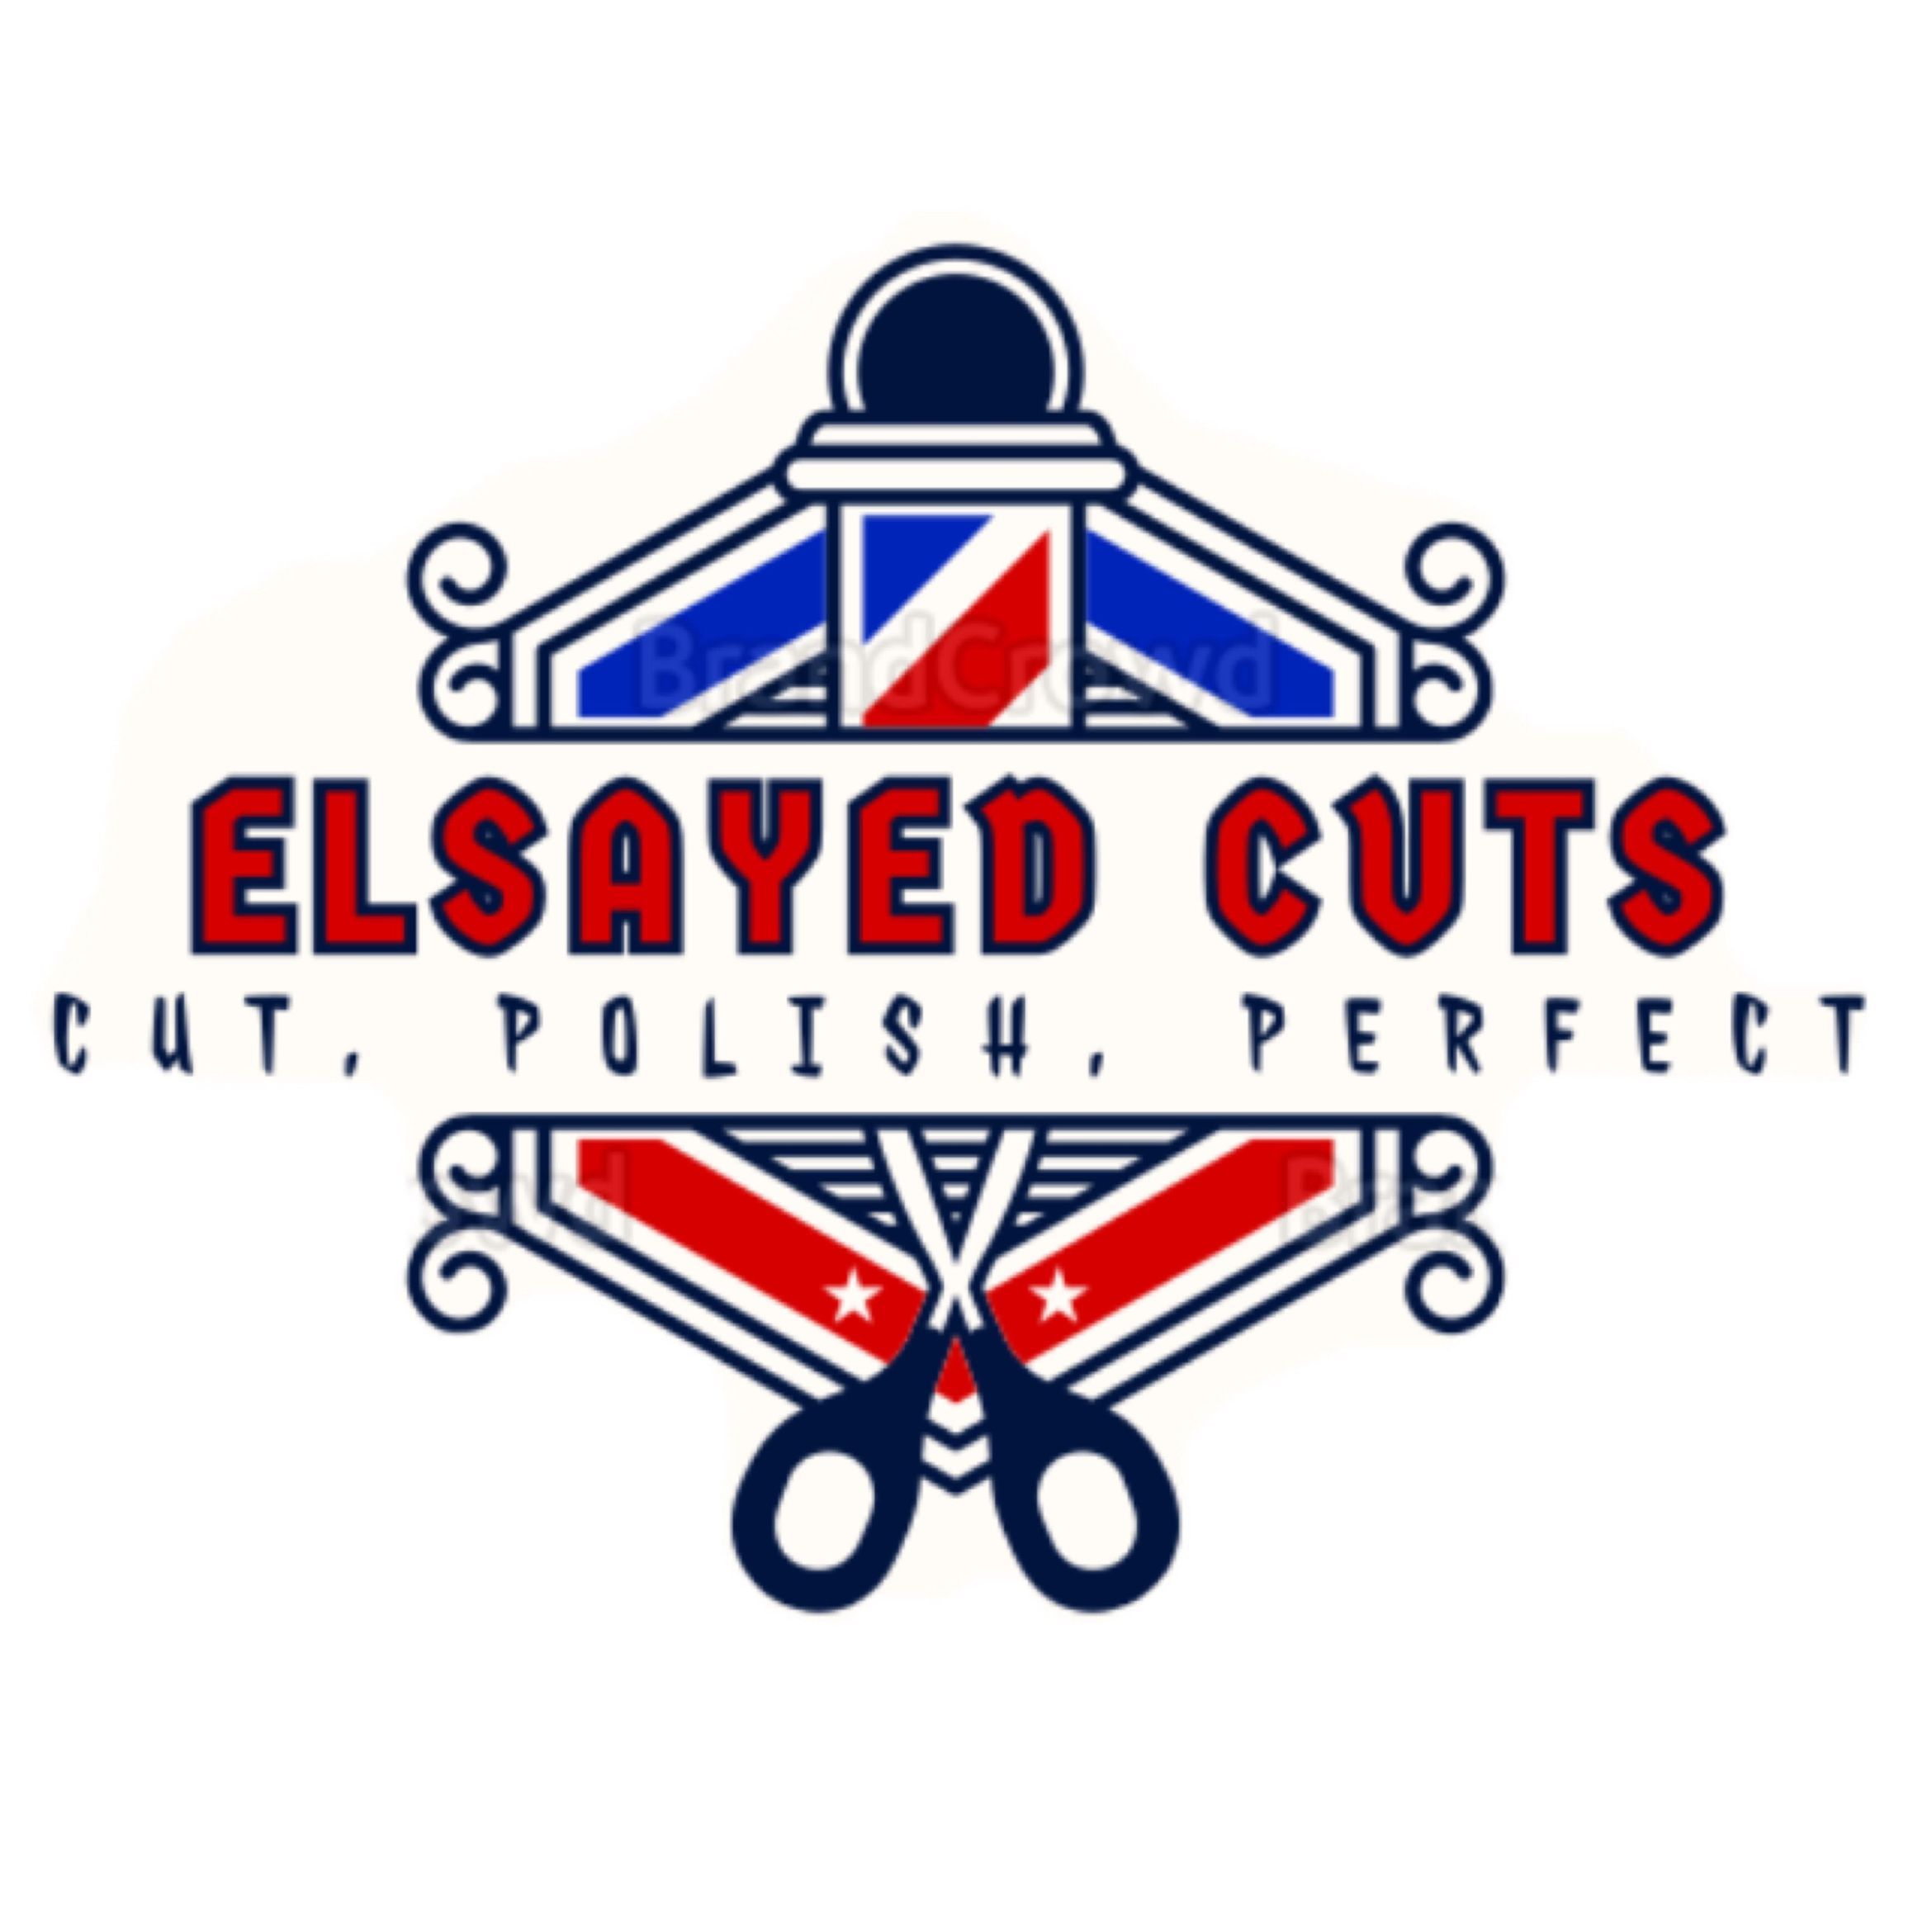 Elsayed Cuts, 6438 Norborne Ave, Dearborn Heights, 48127